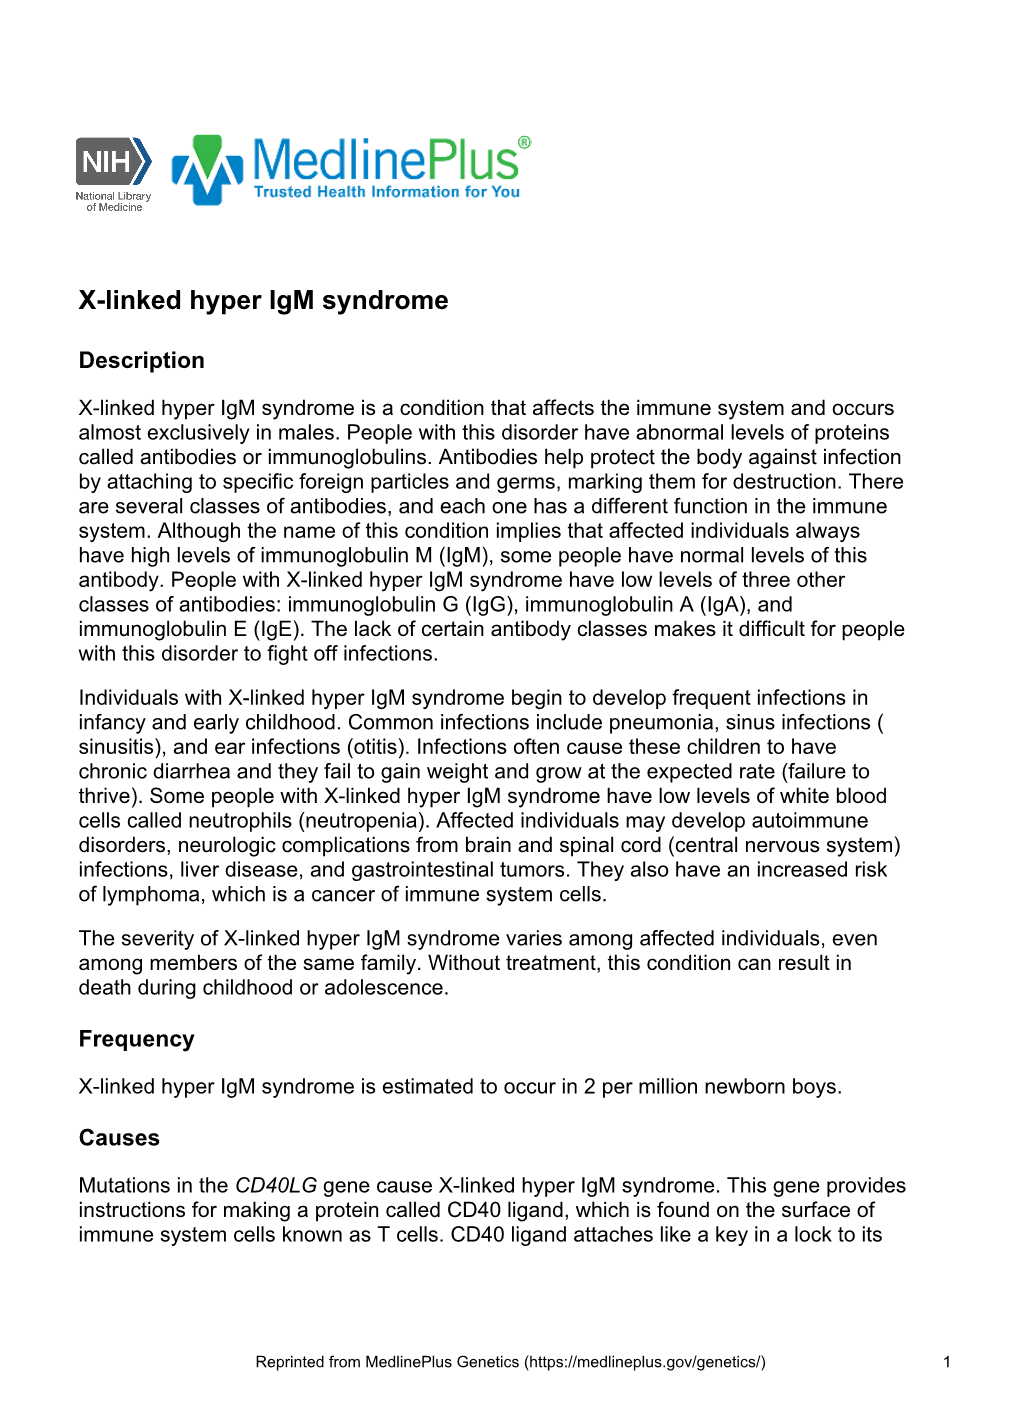 X-Linked Hyper Igm Syndrome